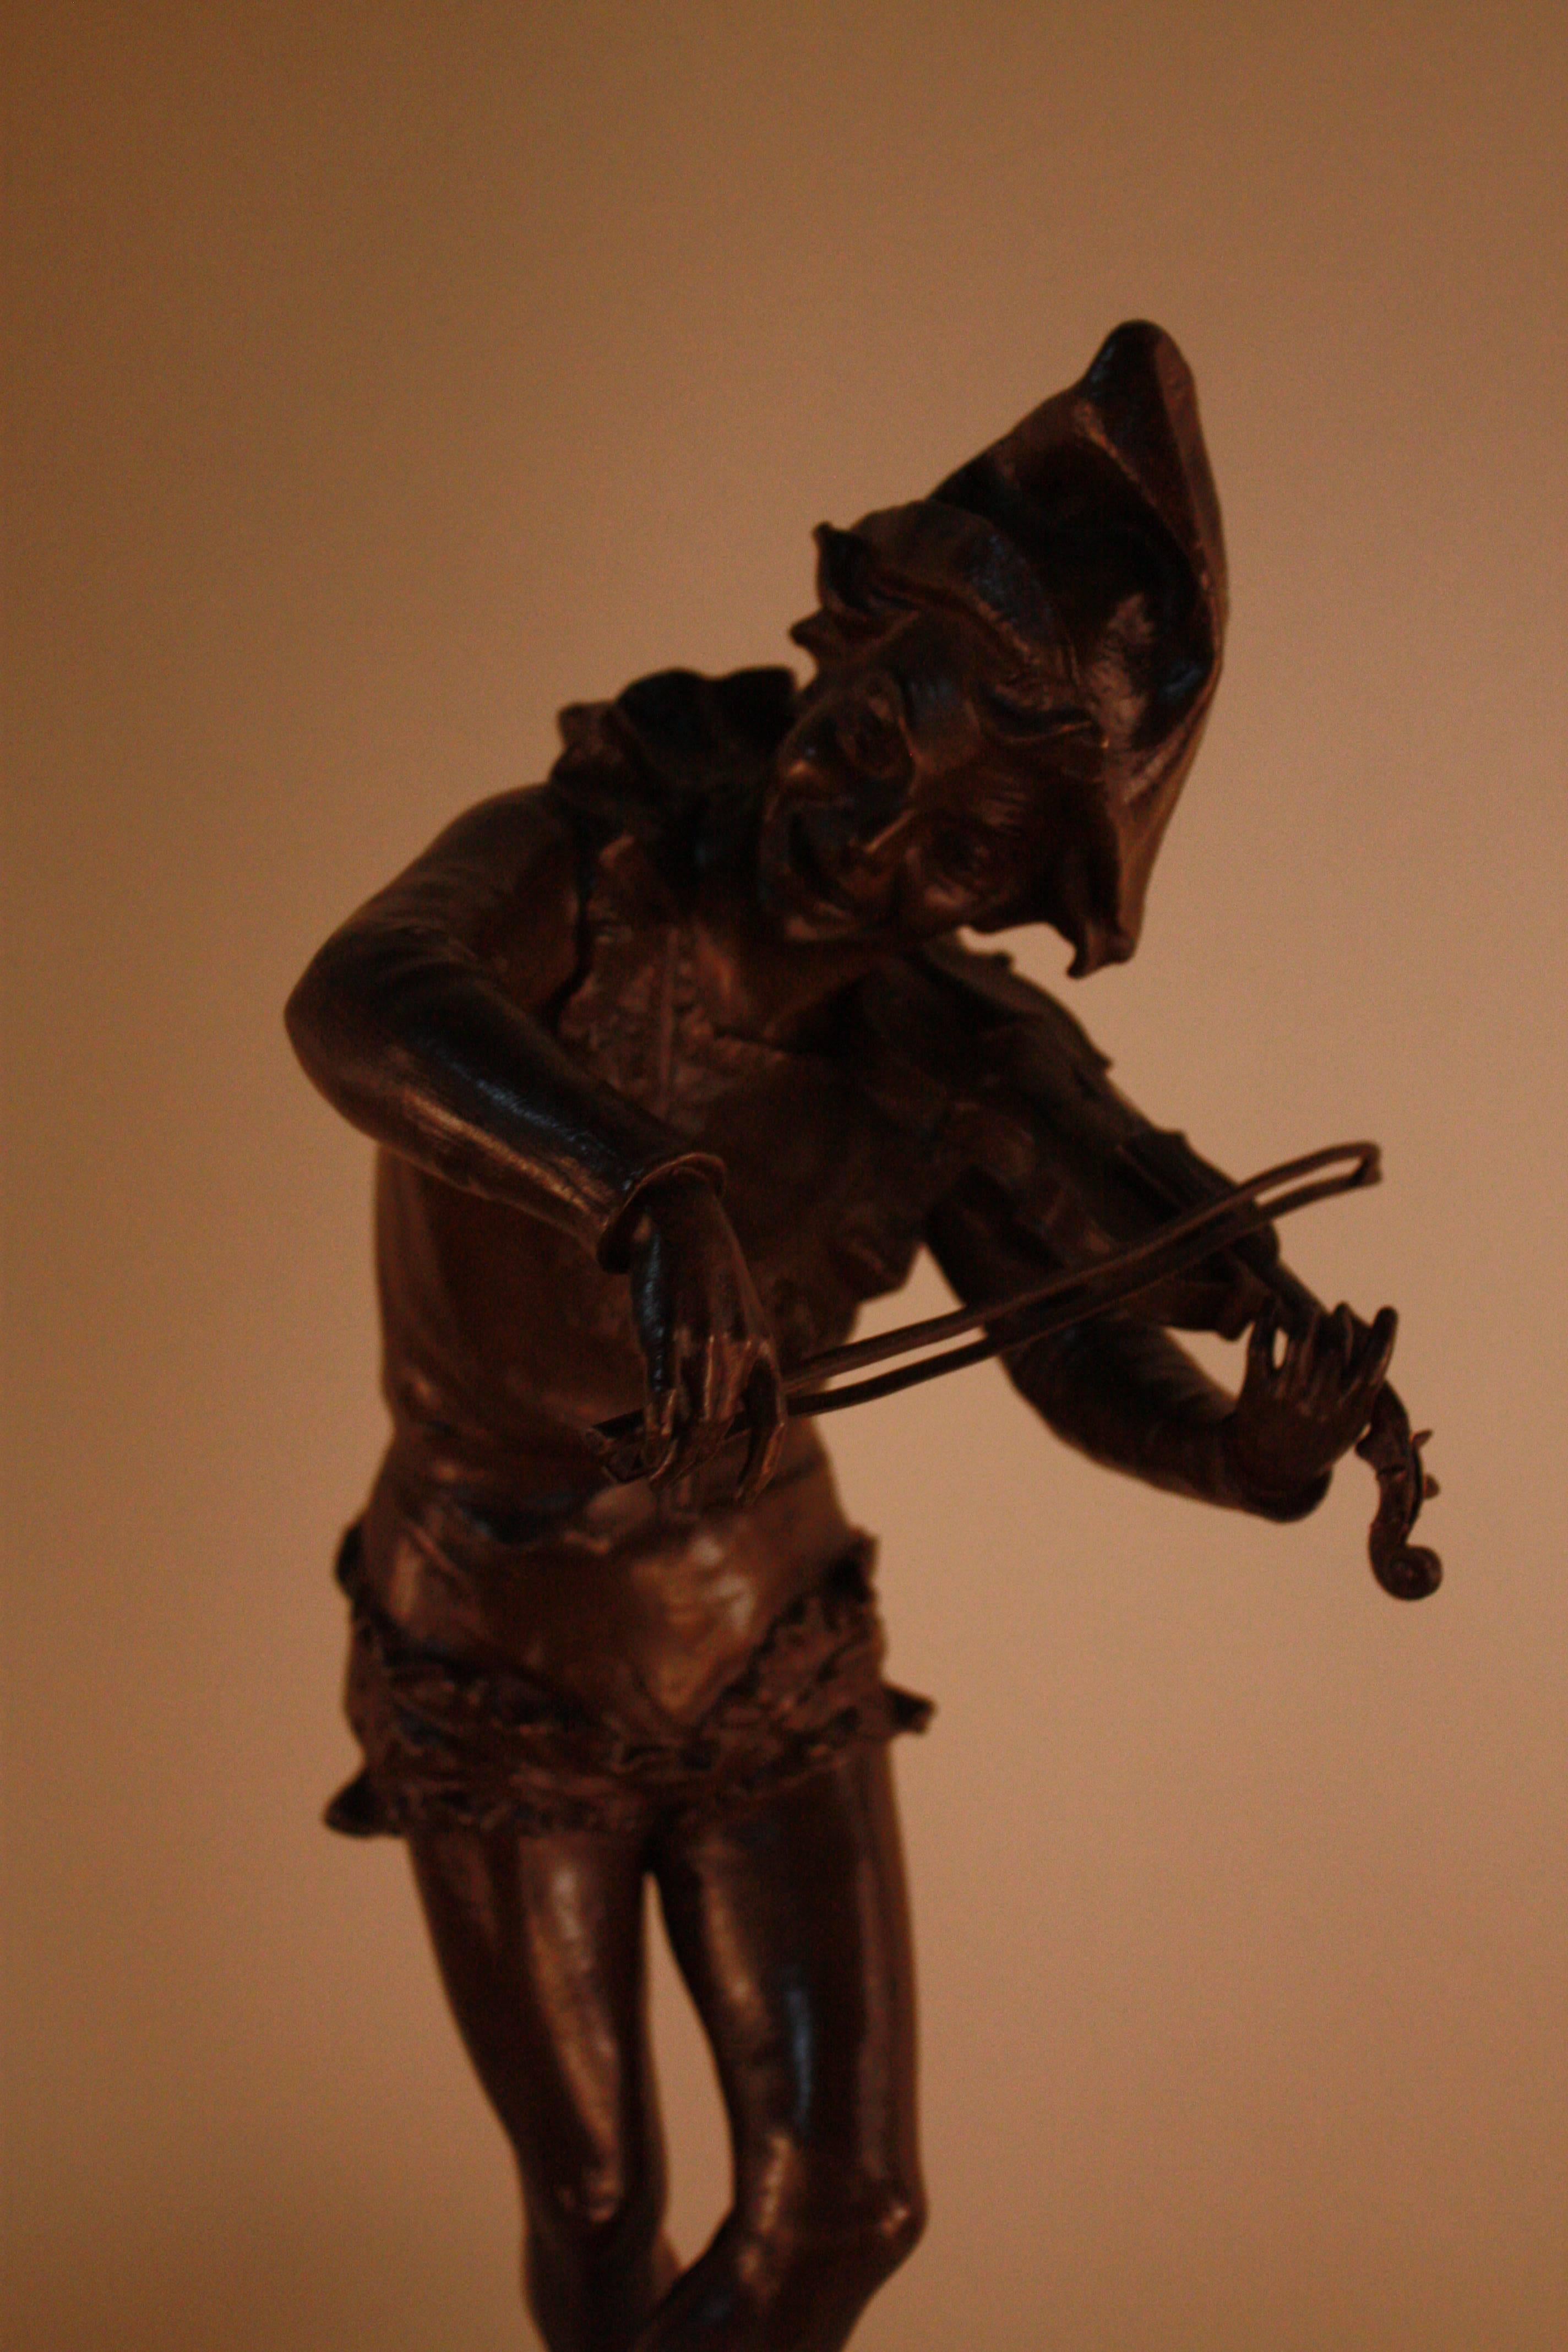 Brown patina bronze sculpture of harlequin violinist by Jules Weyns.
Fantastic subject with great detail.